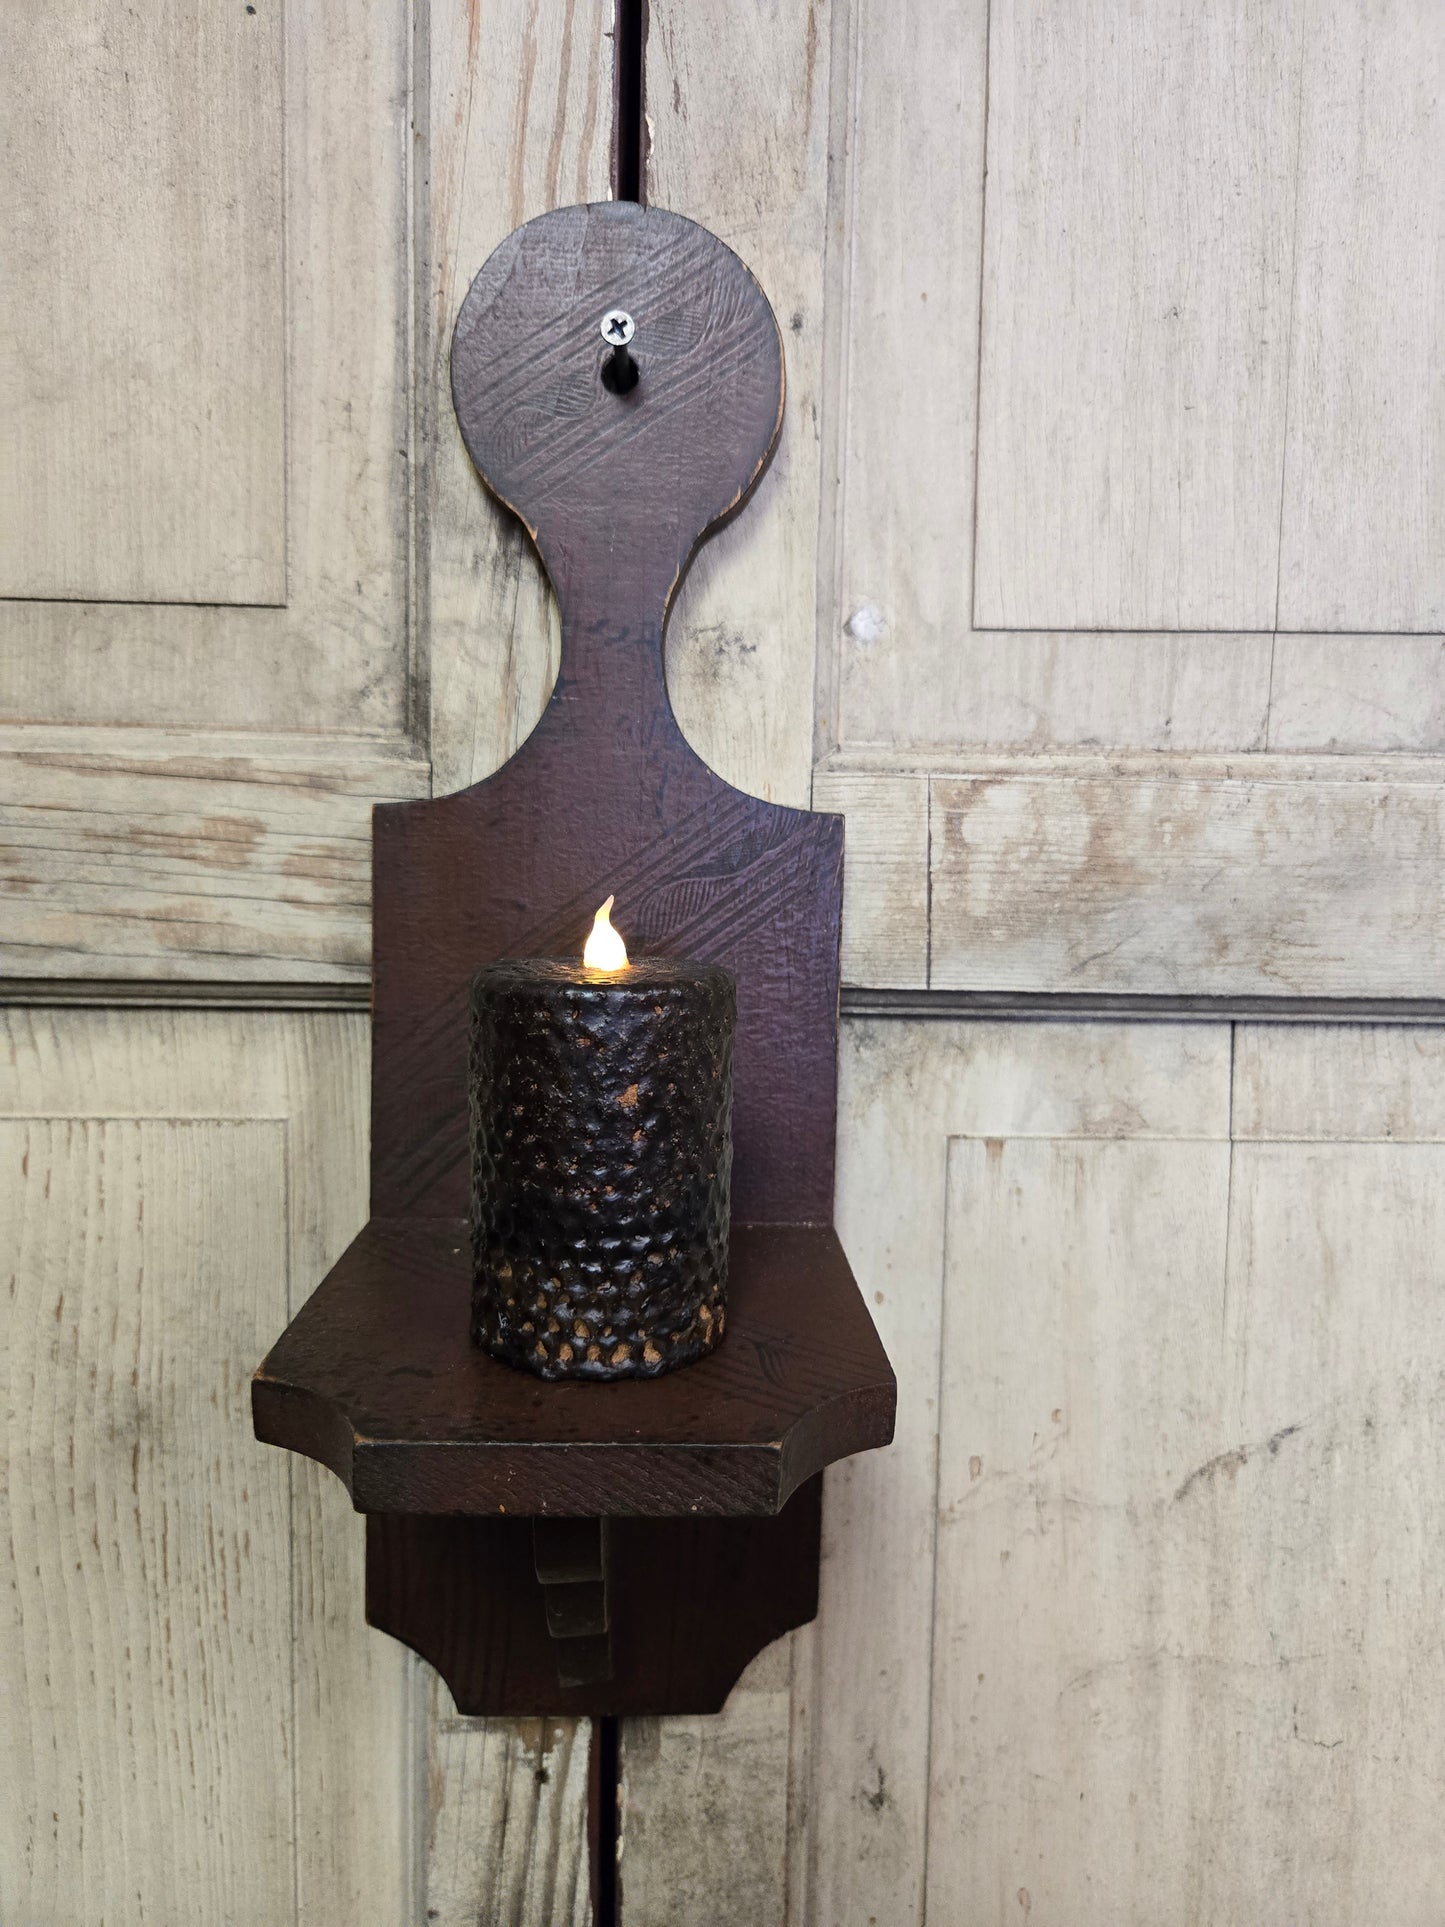 Combed Wooden Sconce